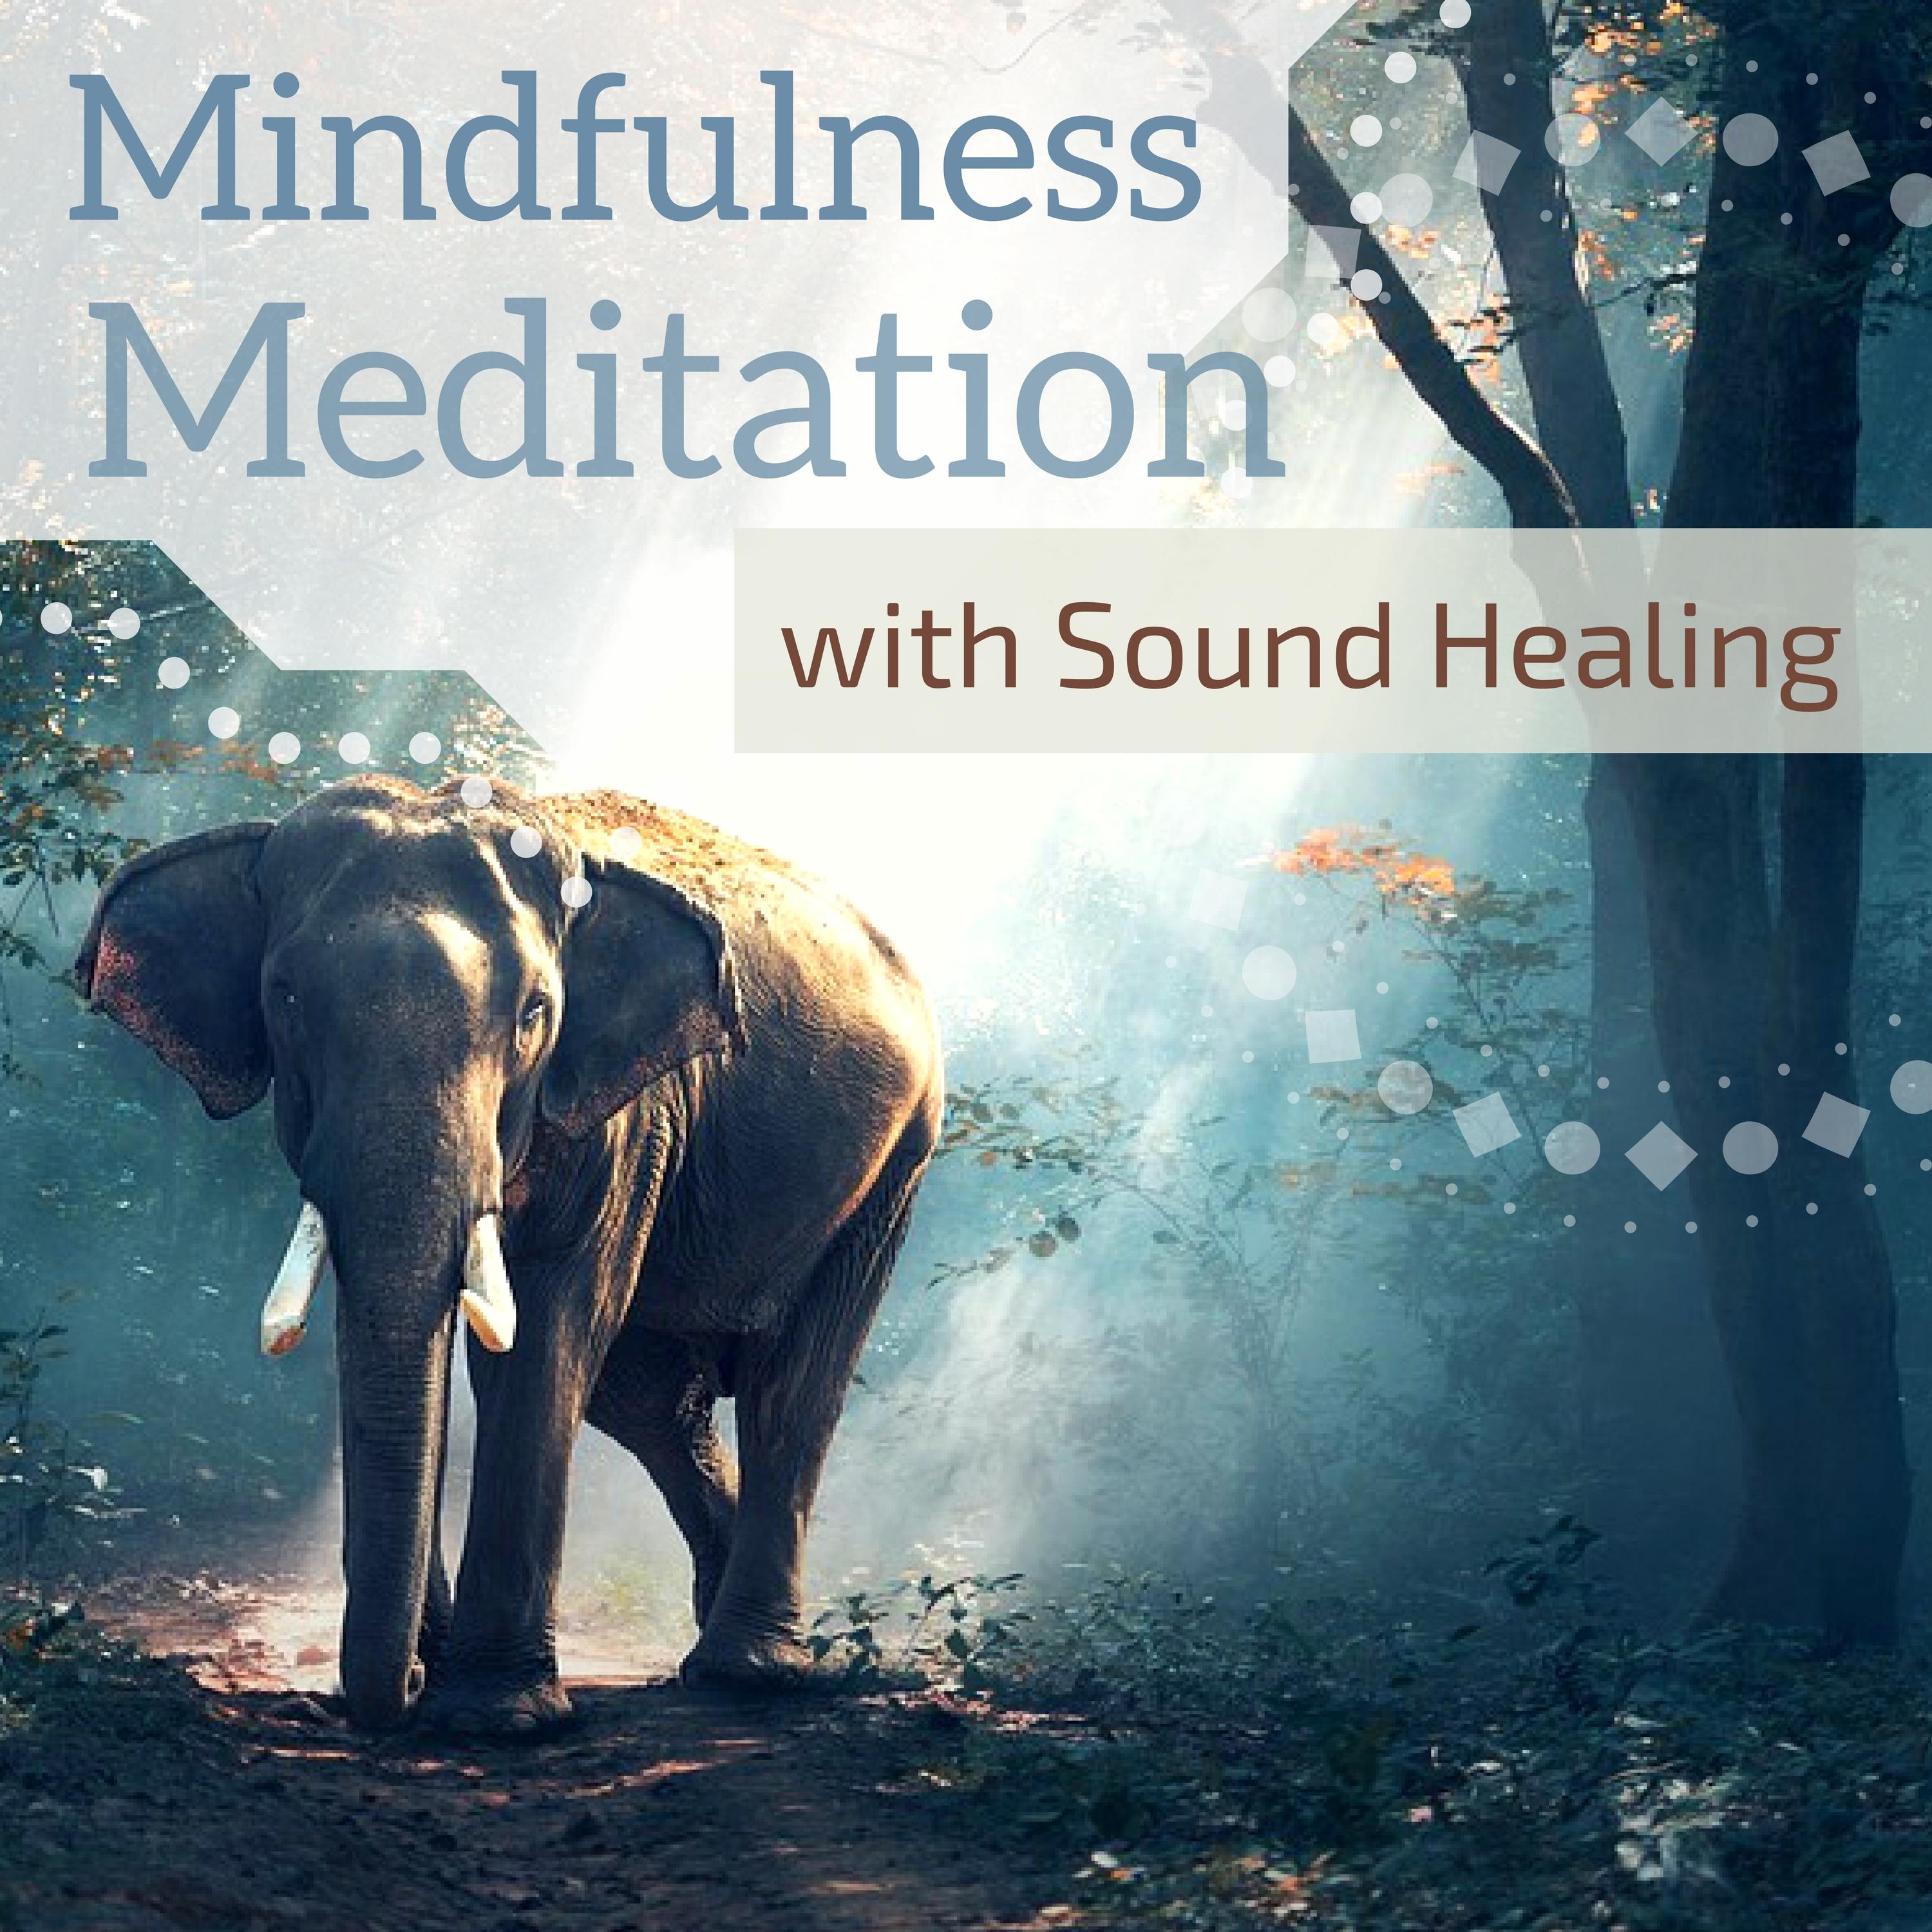 Mindfulness Meditation with Sound Healing - 80 Songs for Healing Anxiety & Inner Peace